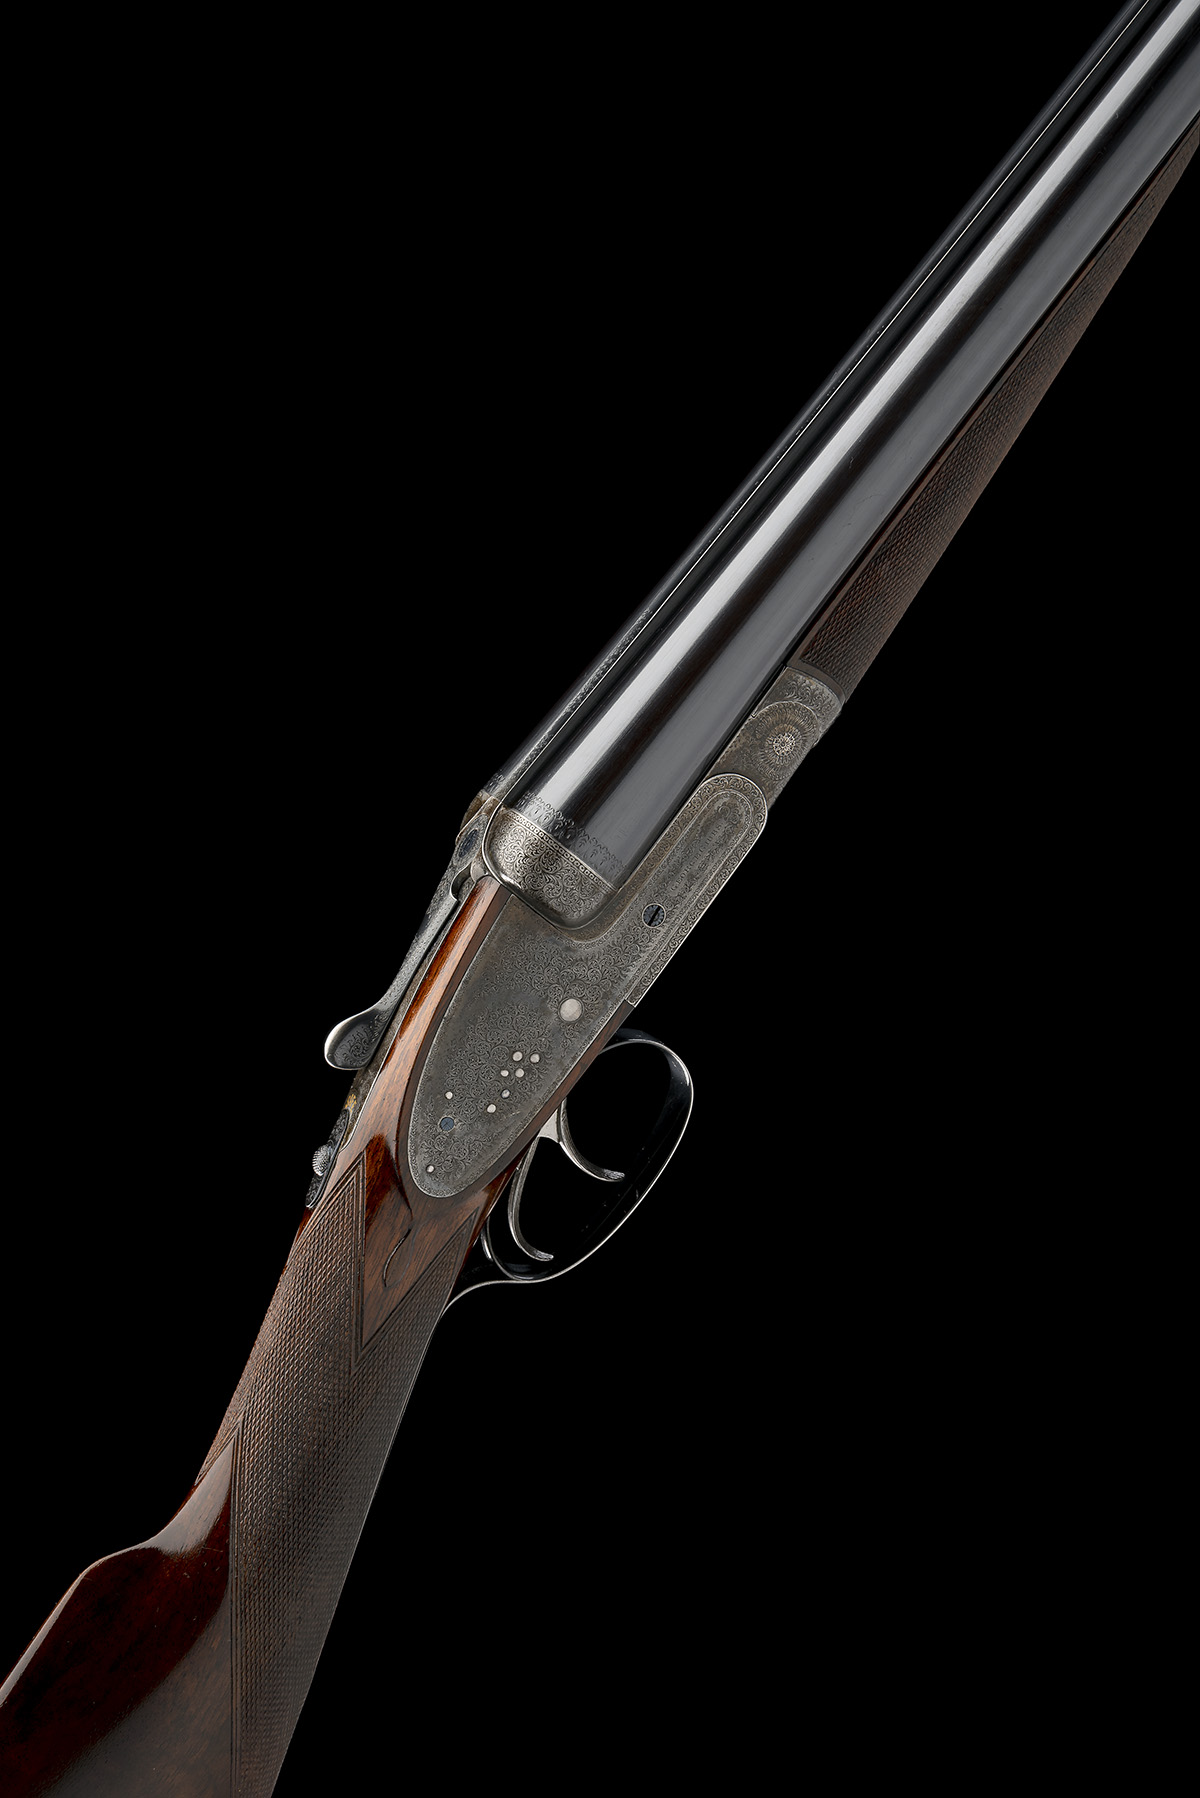 GEORGE GIBBS A 12-BORE 'BEST QUALITY' SIDELOCK EJECTOR, serial no. 20016, for 1910, 29in. nitro